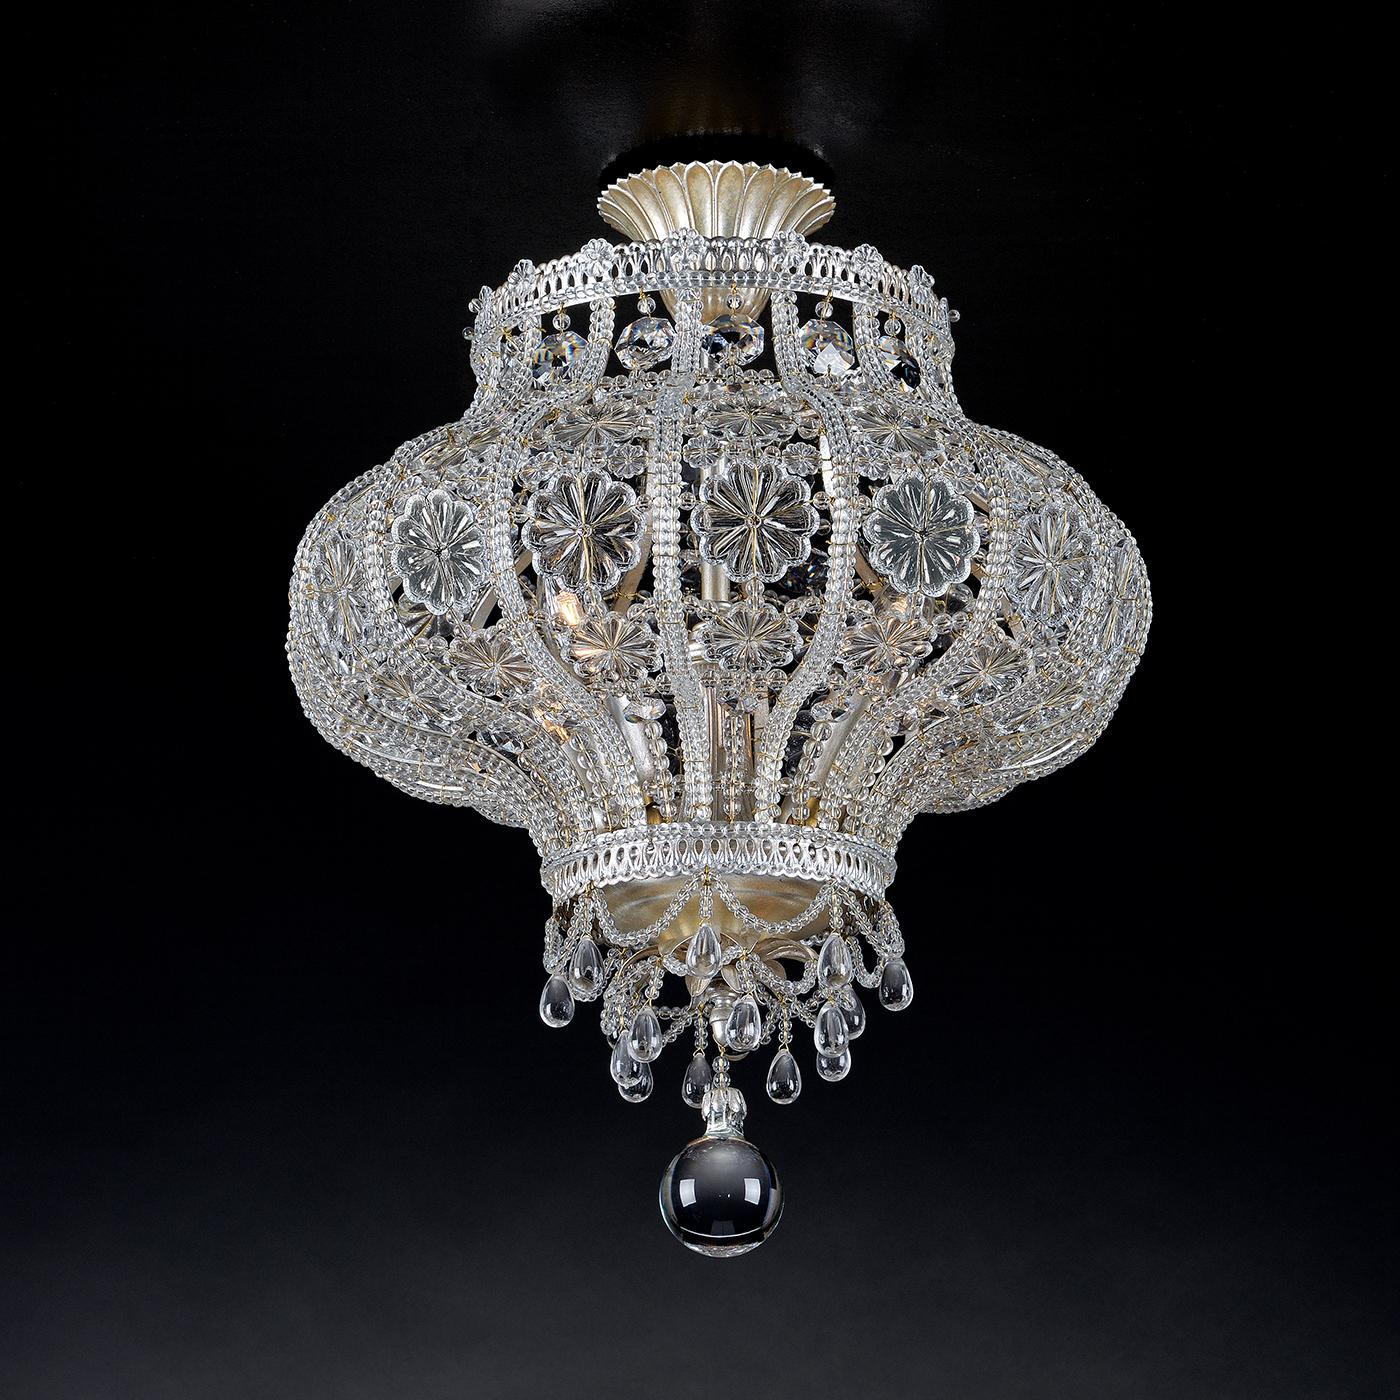 Drawing inspiration from Middle Eastern lanterns, this flush ceiling light is made entirely in Italy. With glass crystals in a variety of shapes, the pendant is completed with a silver leaf coating for maximum glimmer. Perfect for living and dining